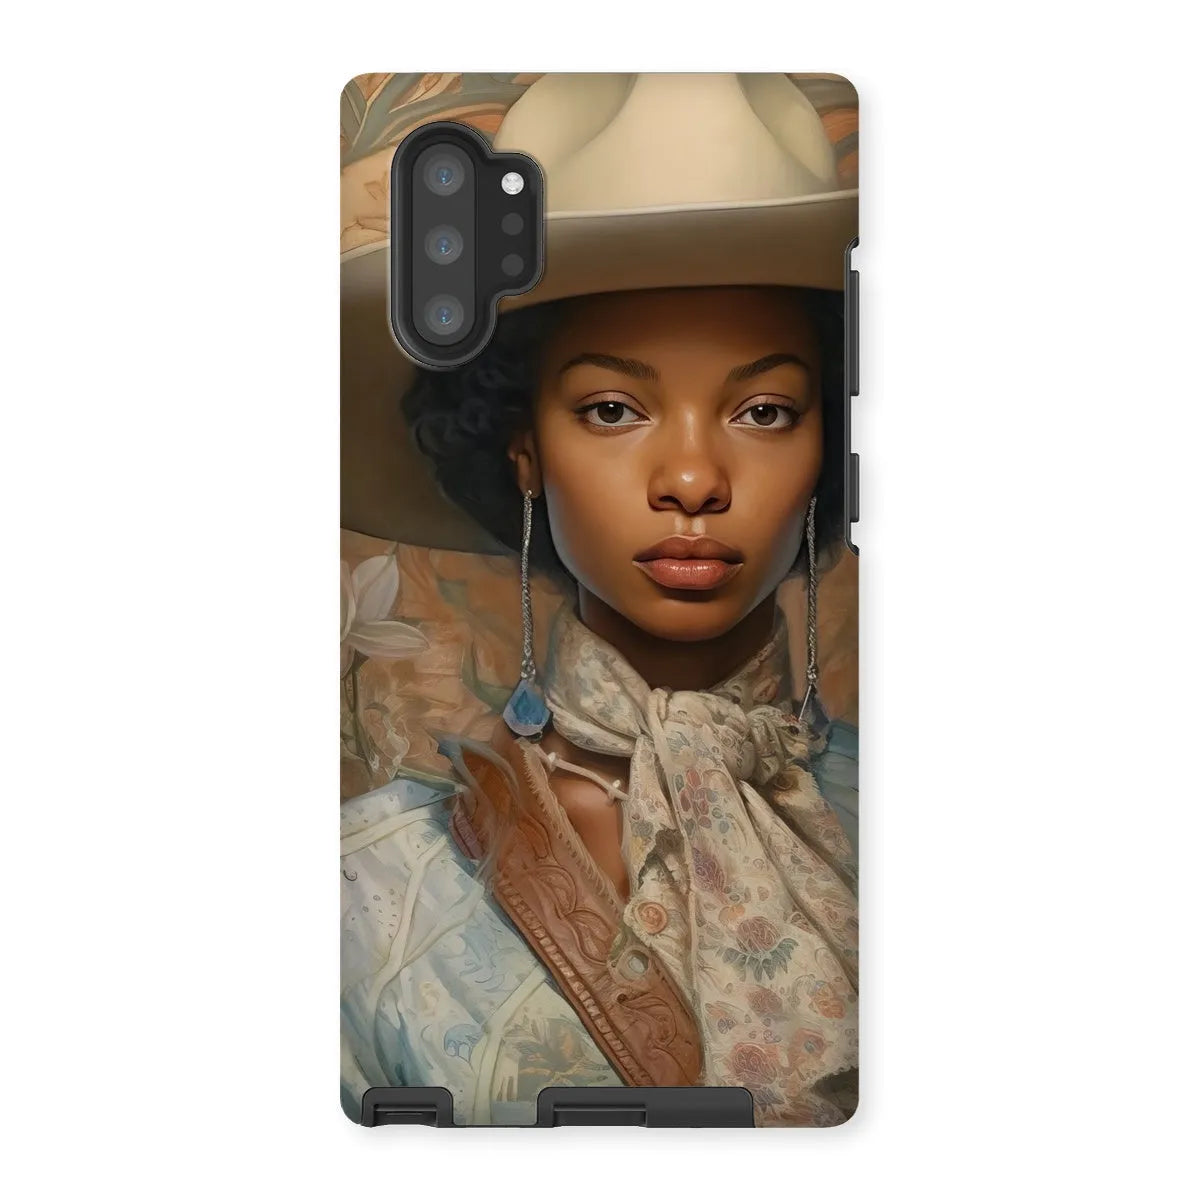 Imani The Lesbian Cowgirl - Sapphic Art Phone Case - Samsung Galaxy Note 10p / Matte - Mobile Phone Cases - Aesthetic